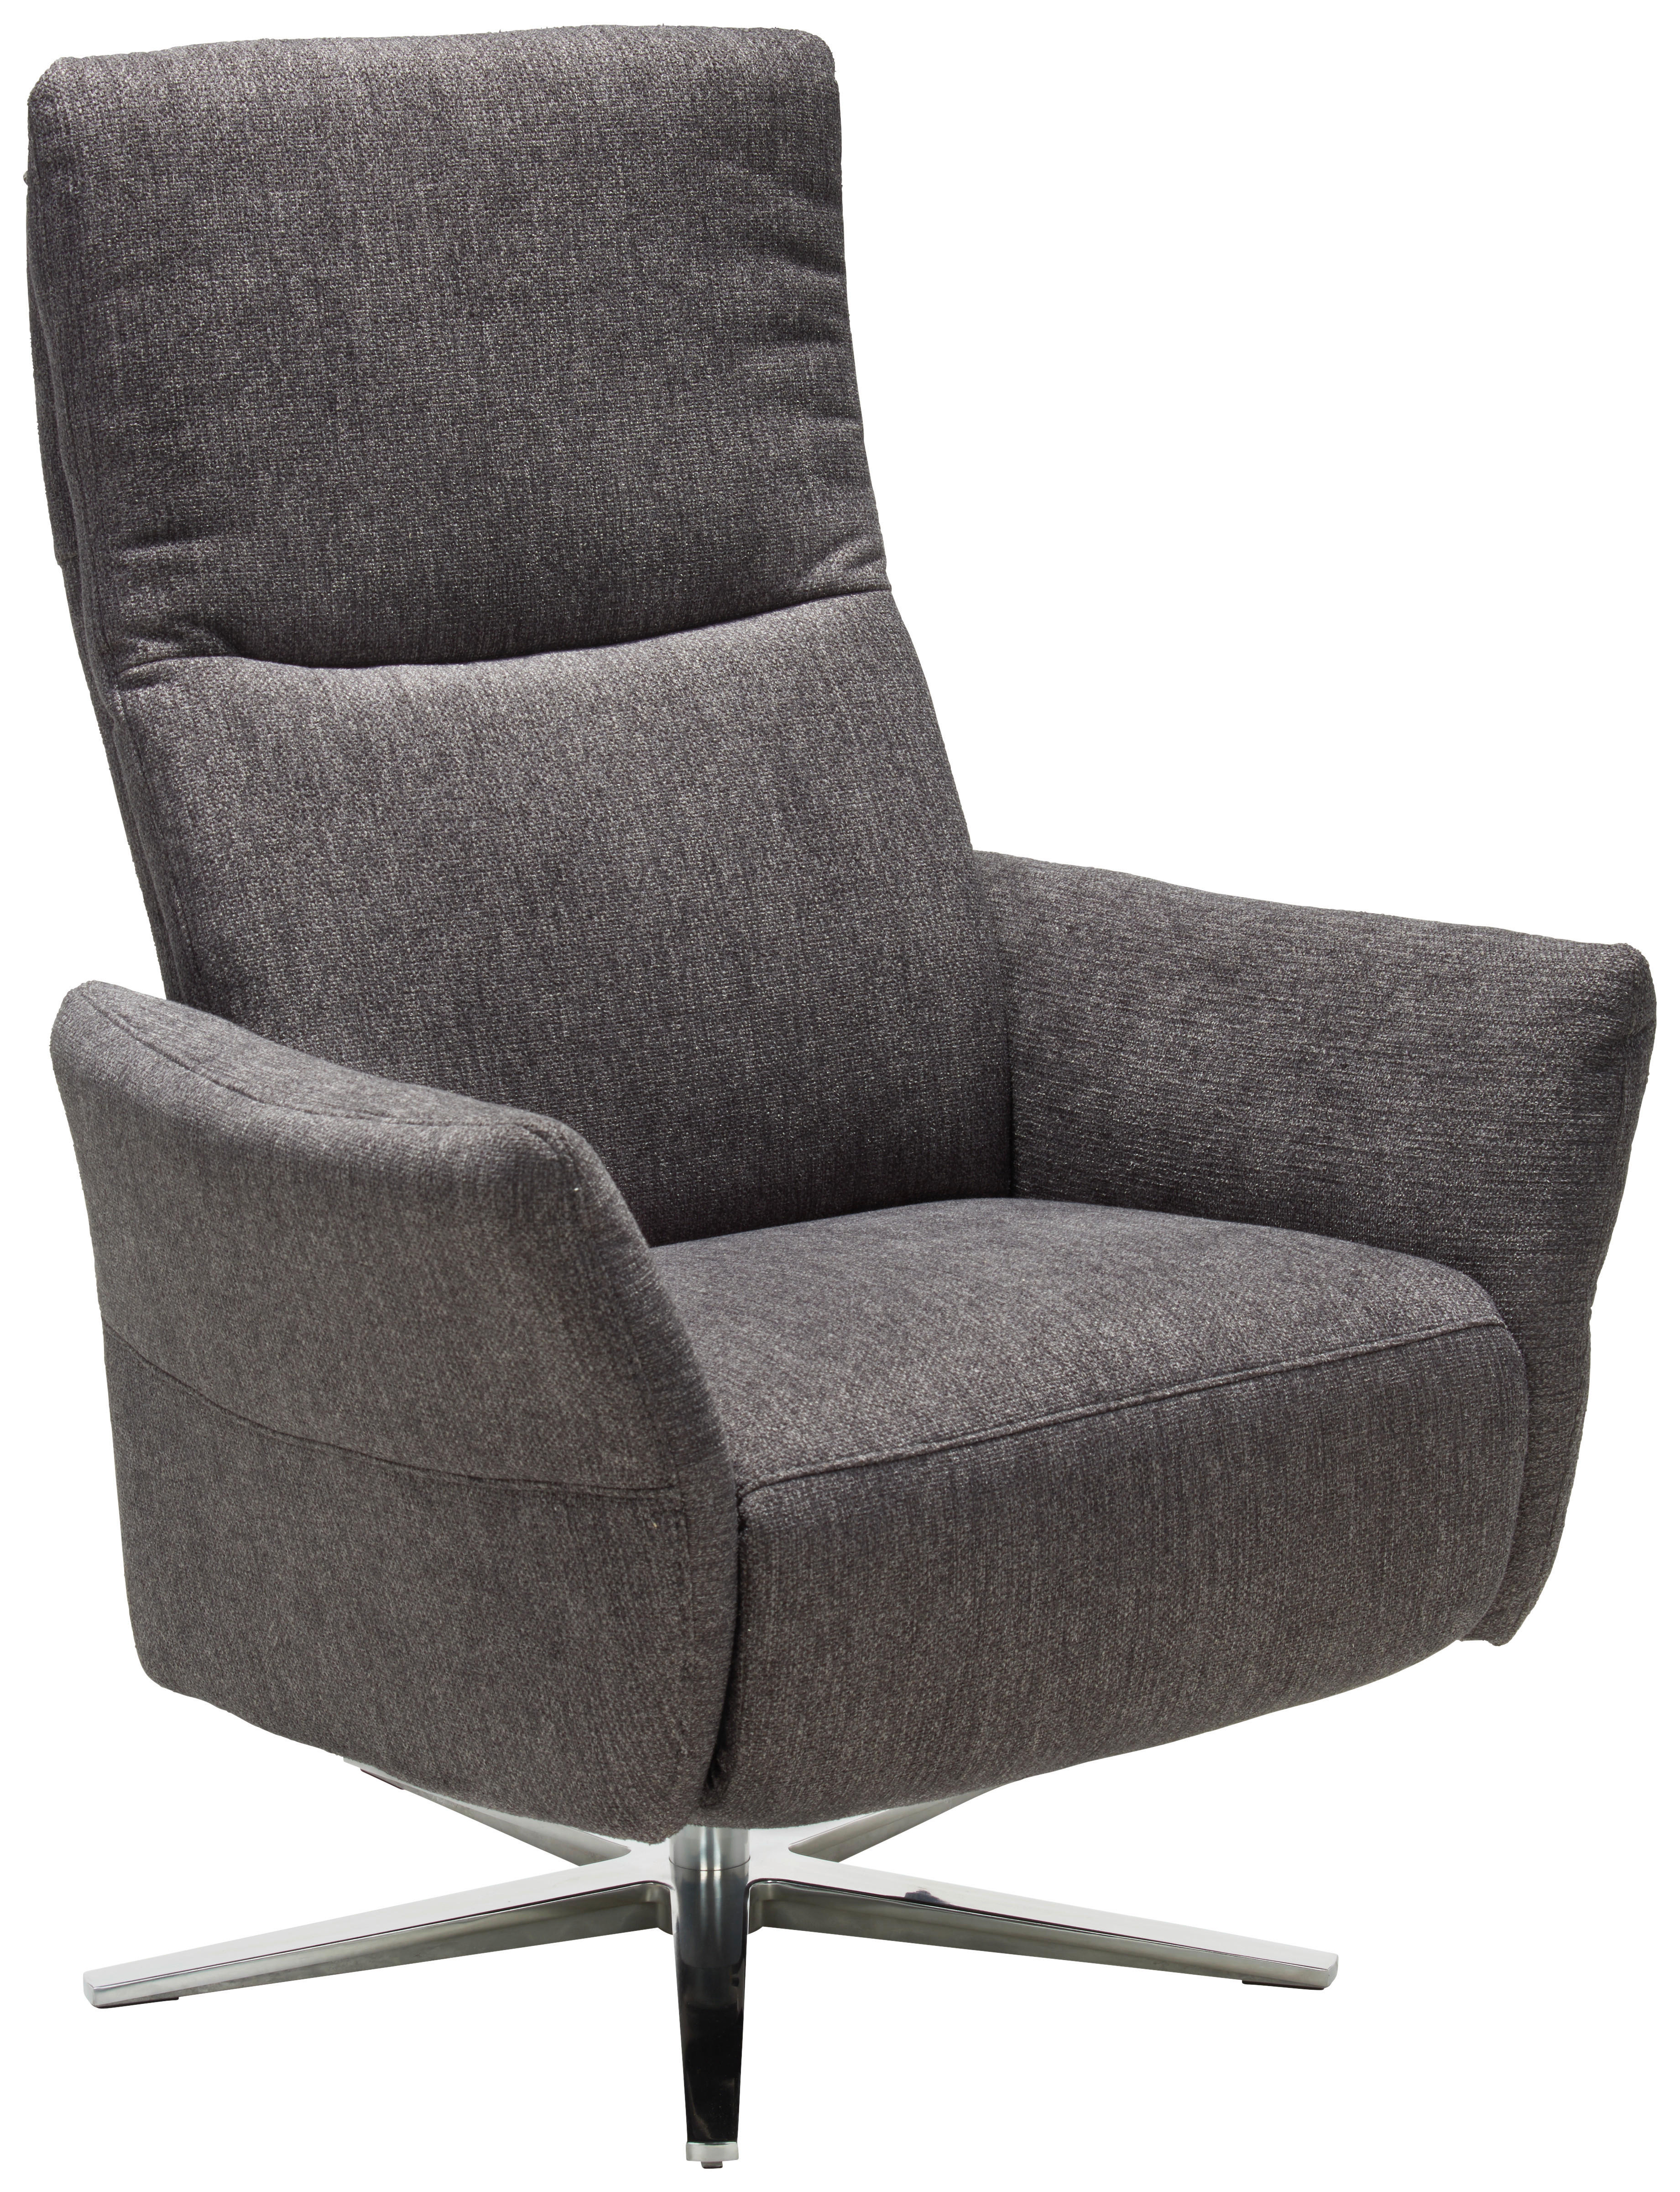 RELAXSESSEL Flachgewebe Relaxfunktion    - Chromfarben/Anthrazit, Design, Textil/Metall (79/114/81-161cm) - Pure Home Comfort